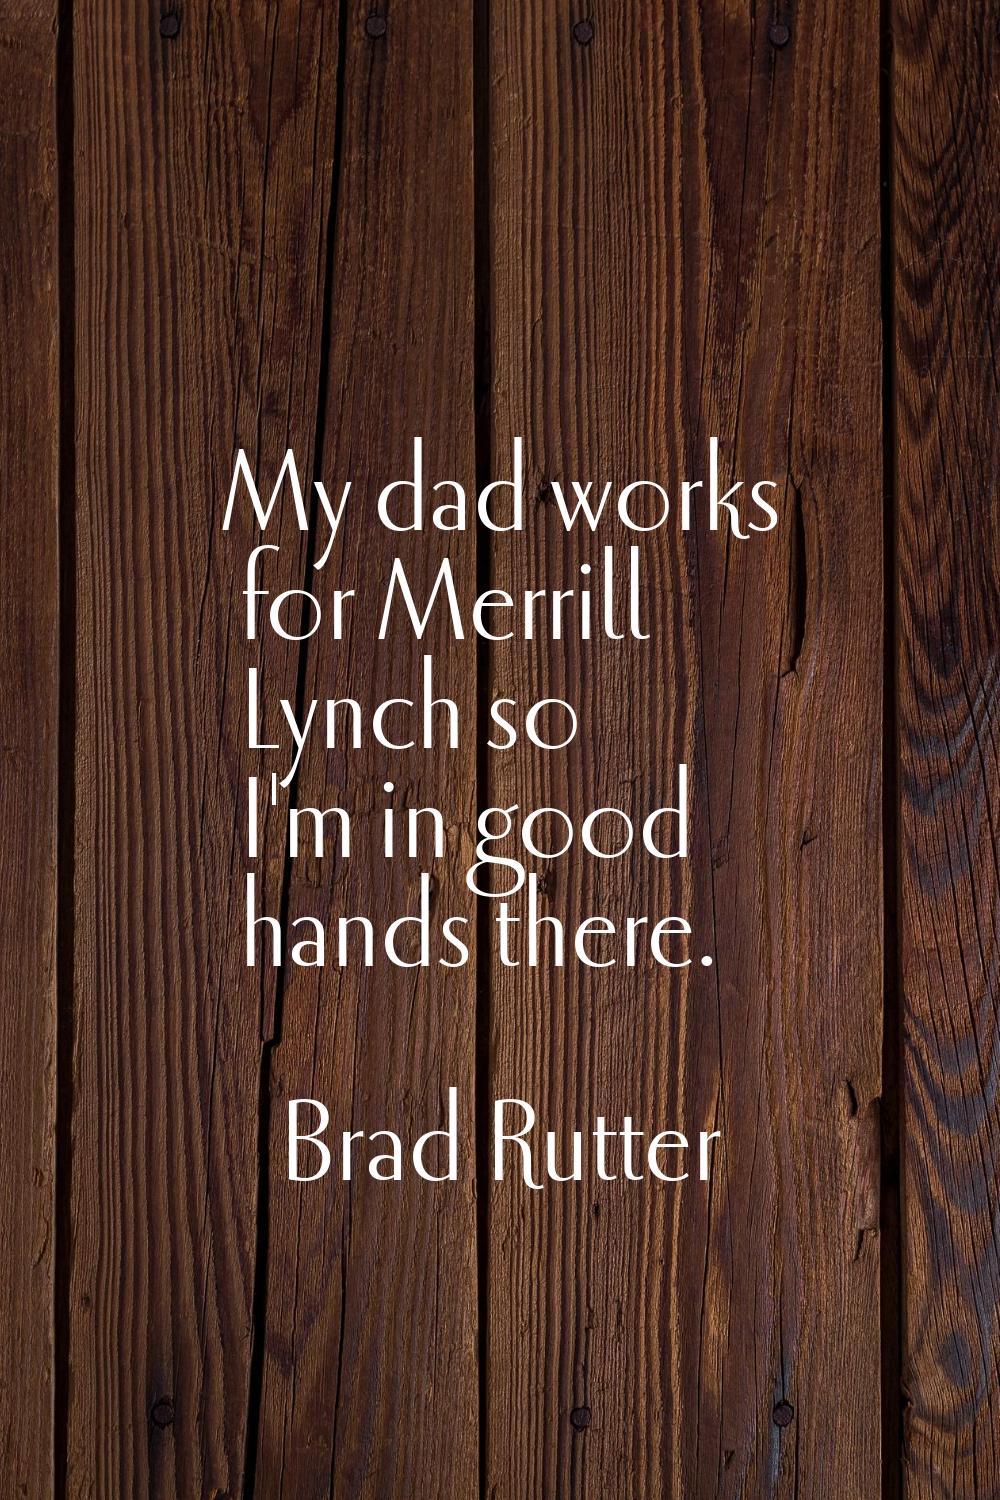 My dad works for Merrill Lynch so I'm in good hands there.